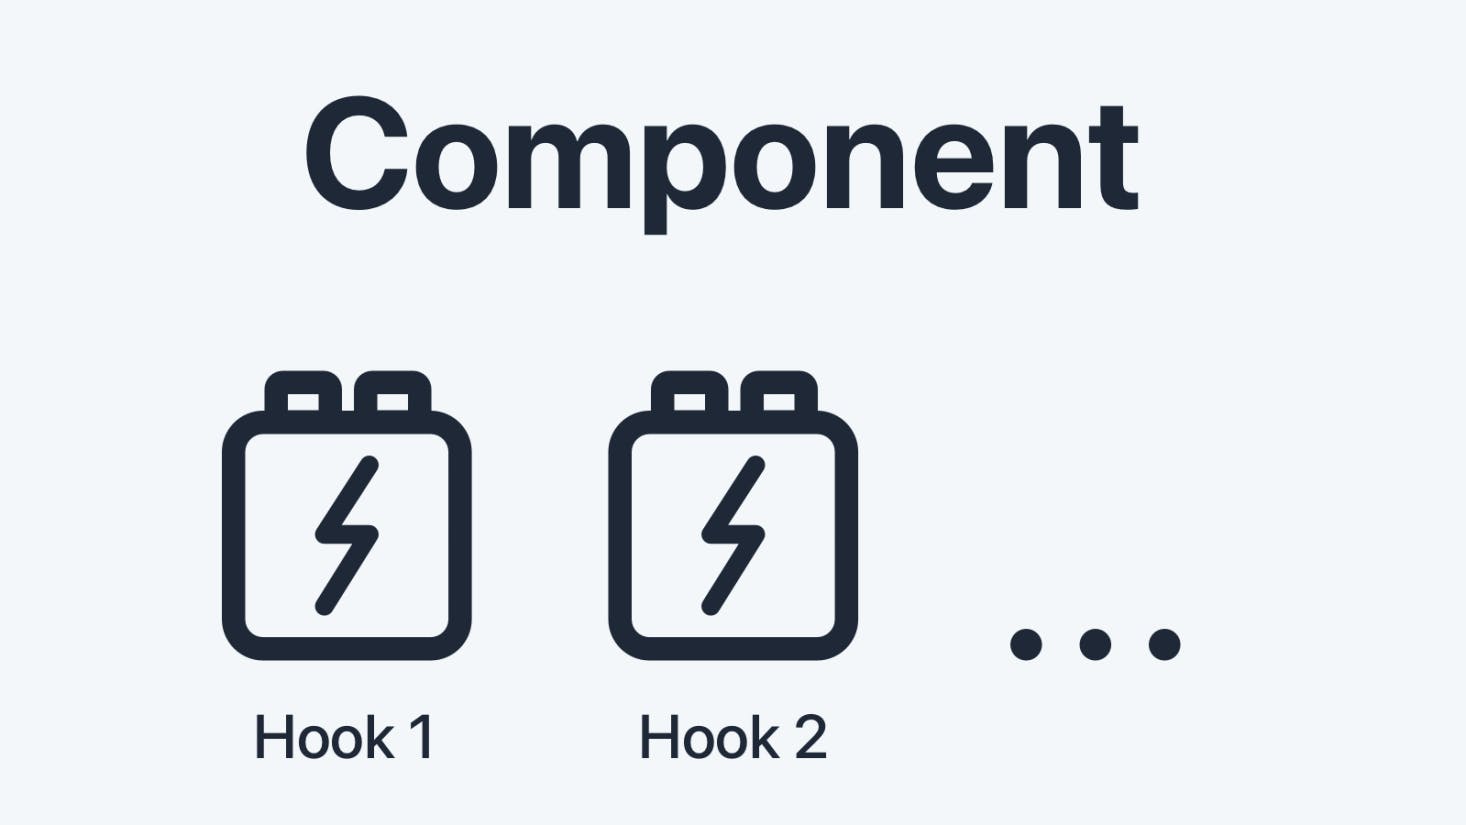 Hooks_add_features_to_your_components.png